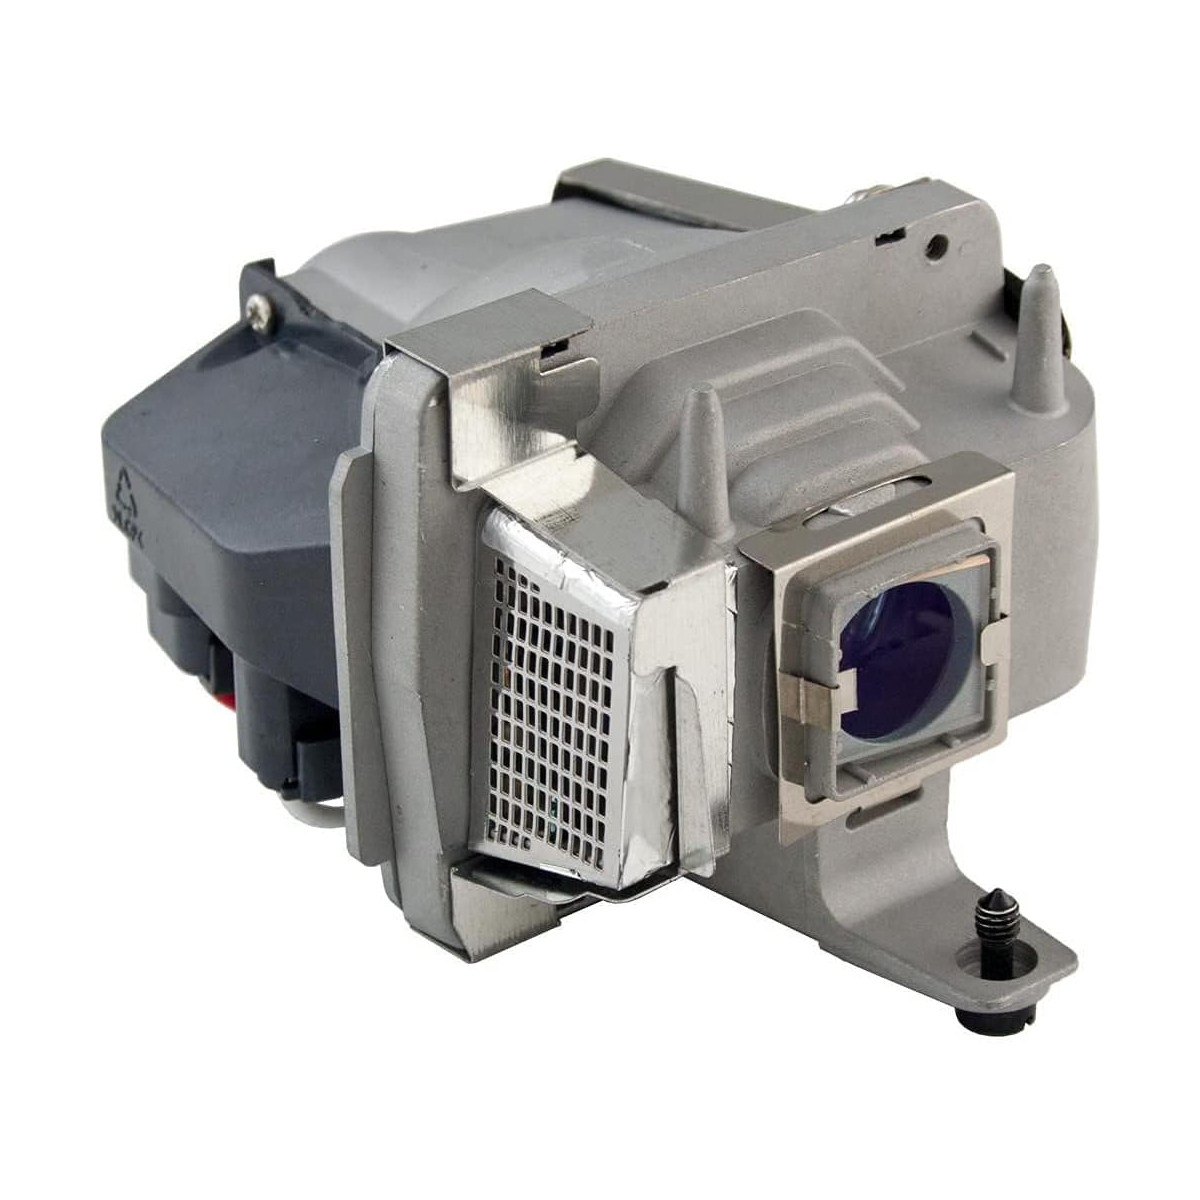 Replacement Projector lamp 456-8759 For Dukane Projector